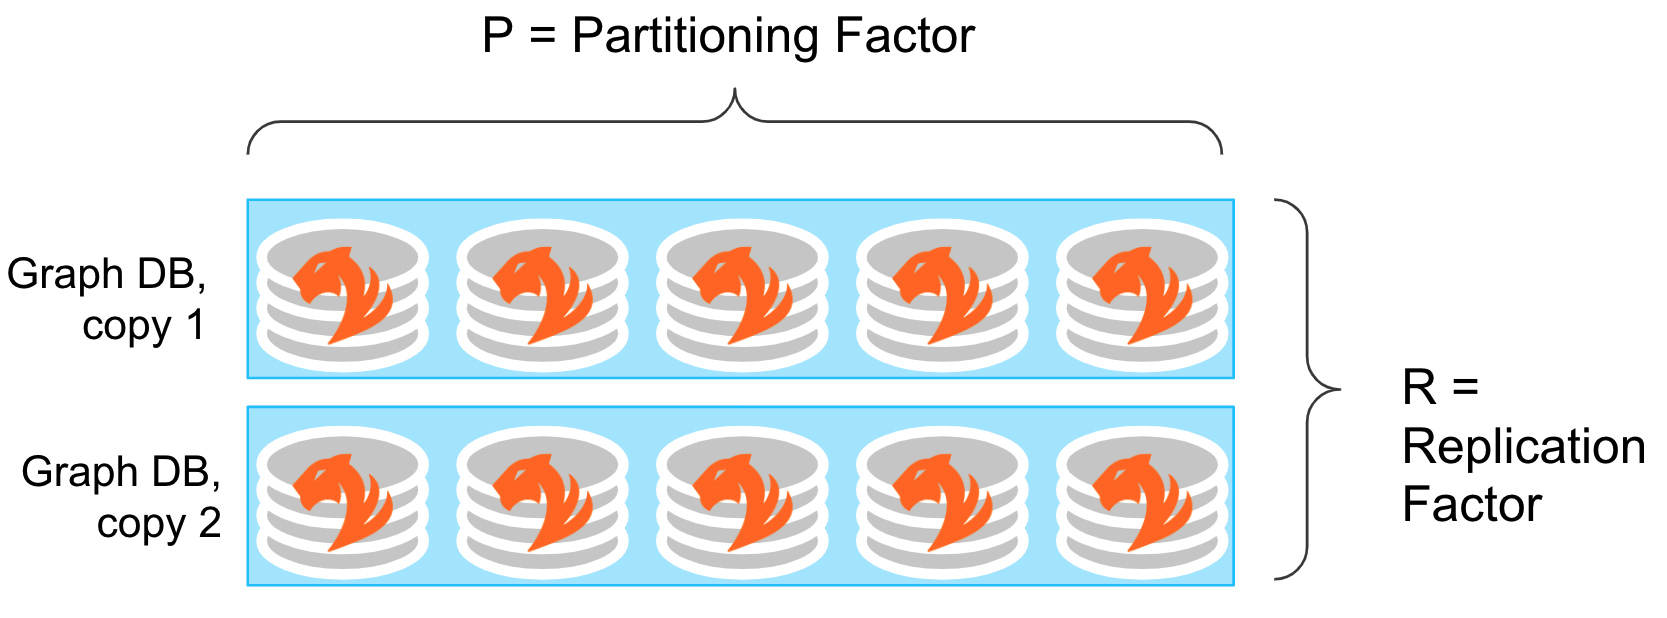 Diagram showing the mathematical relationship between the partitioning and replication factors in a TigerGraph cluster